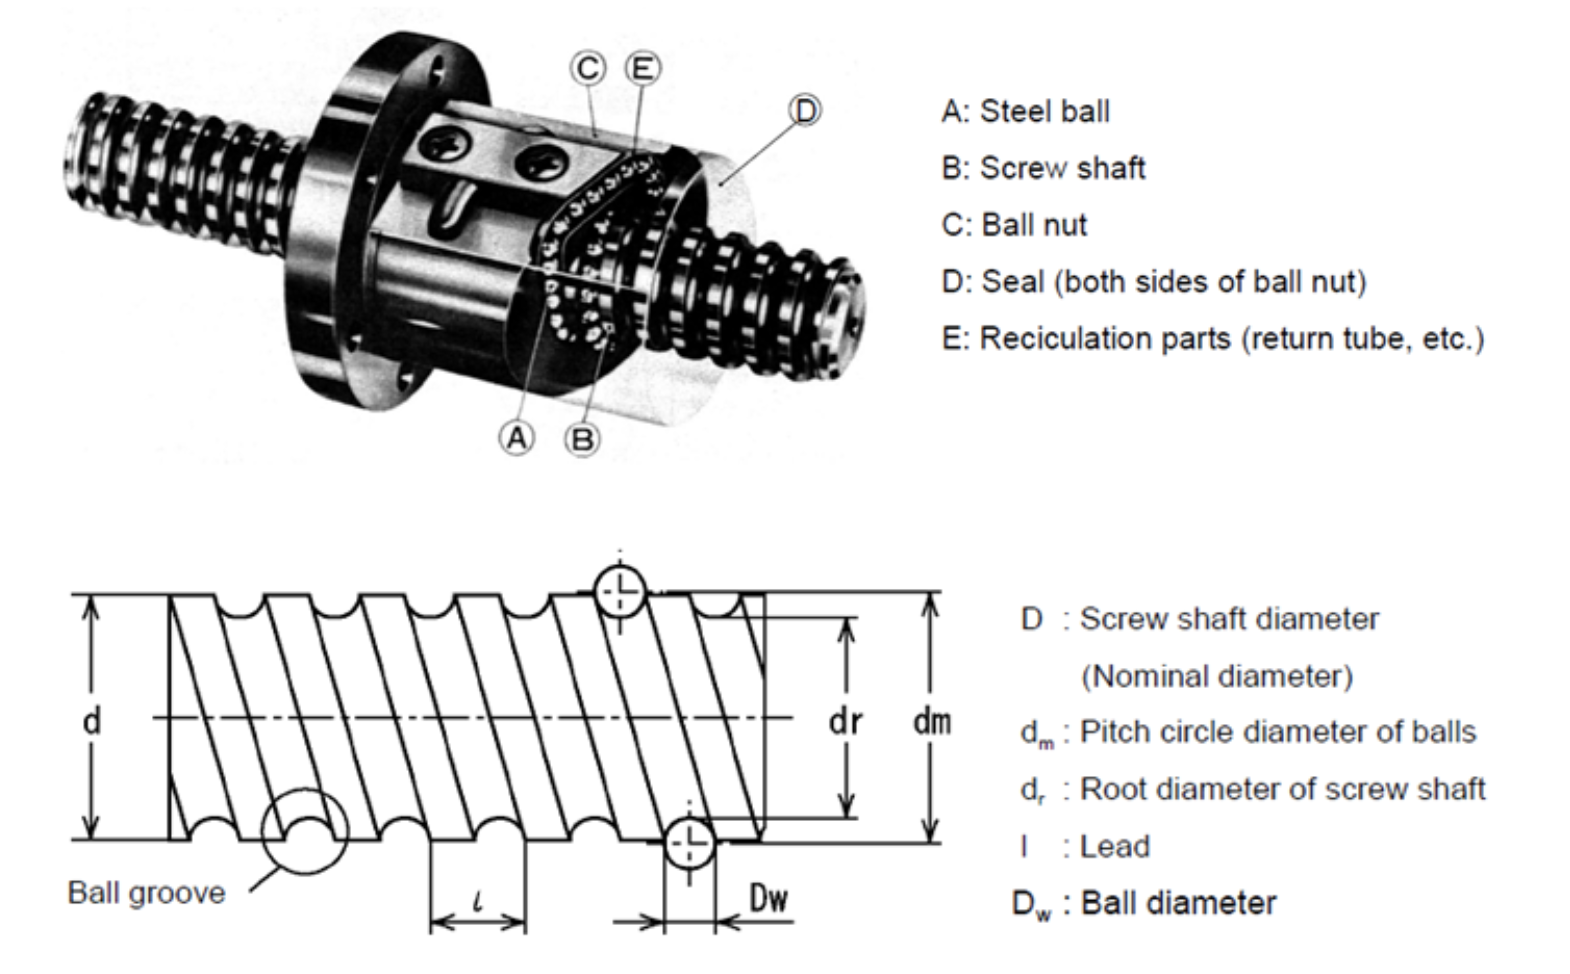 Schematic diagrams and labeling of a linear ball screw assembly and its individual components, including dimensions and parts identification.